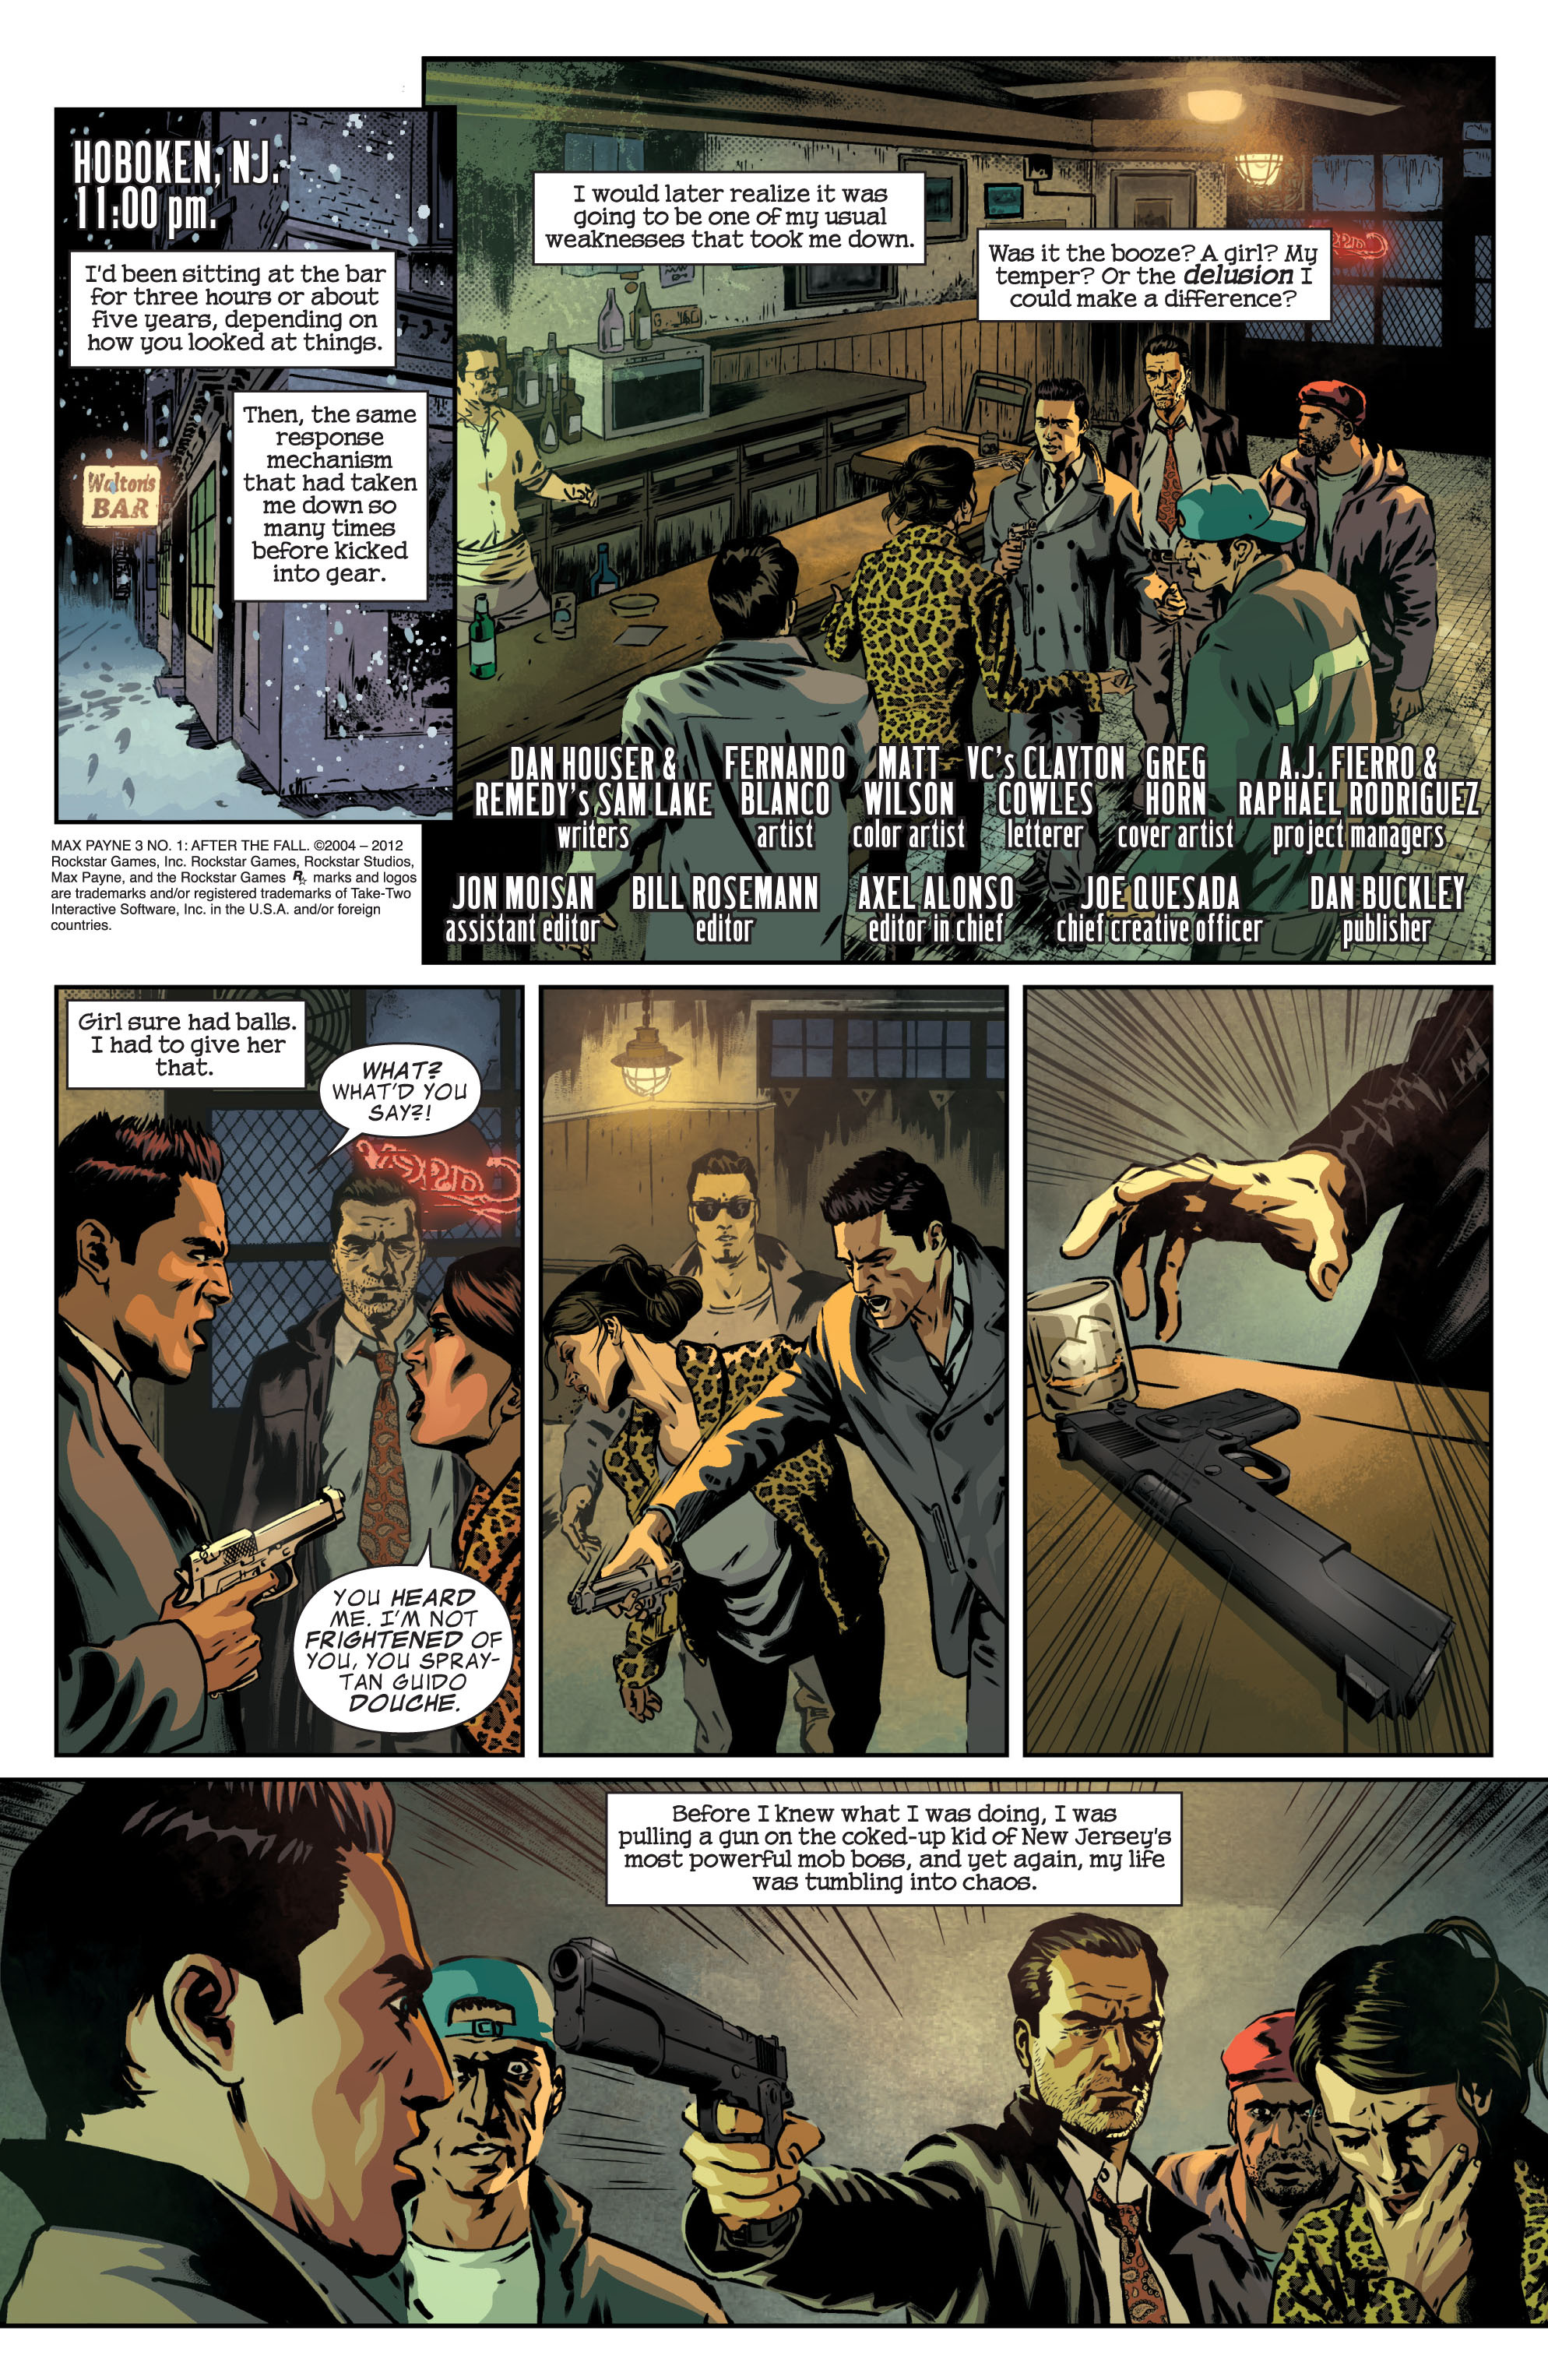 Max Payne 3 Issue 1 | Read Max Payne 3 Issue 1 comic online in high  quality. Read Full Comic online for free - Read comics online in high  quality .| One million comics .Com